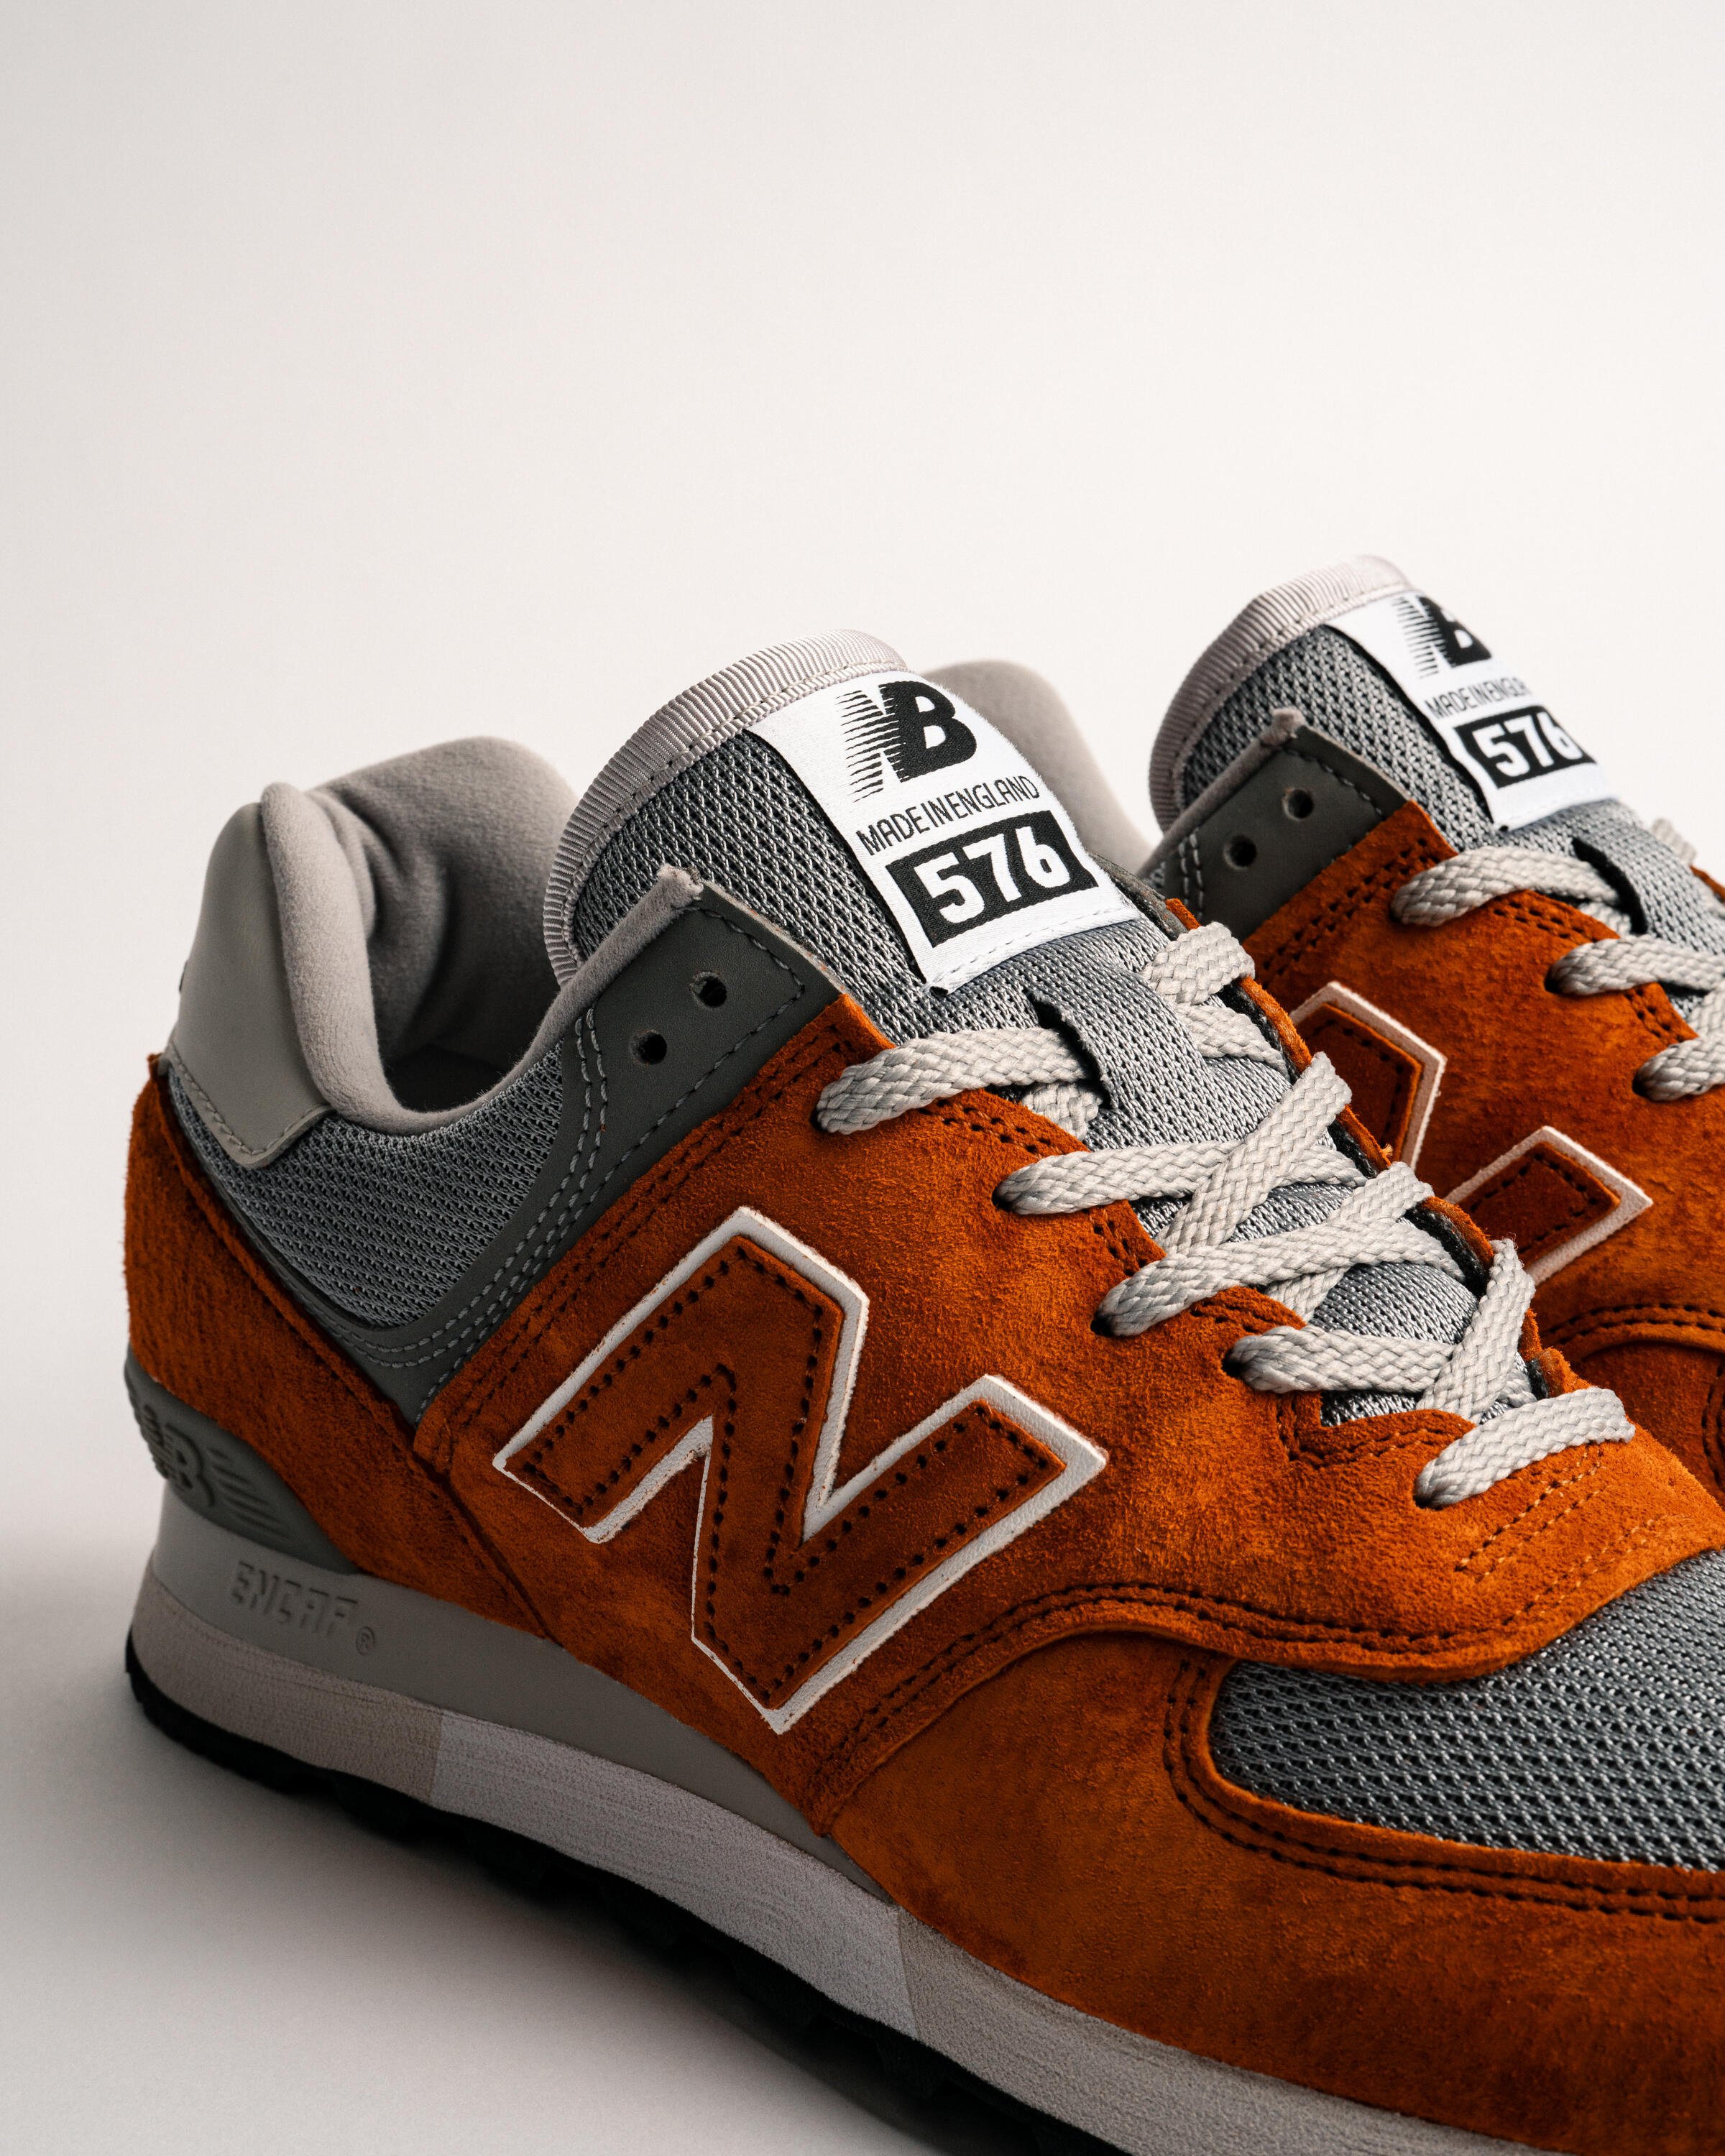 New Balance OU 576 OOK - Made in England